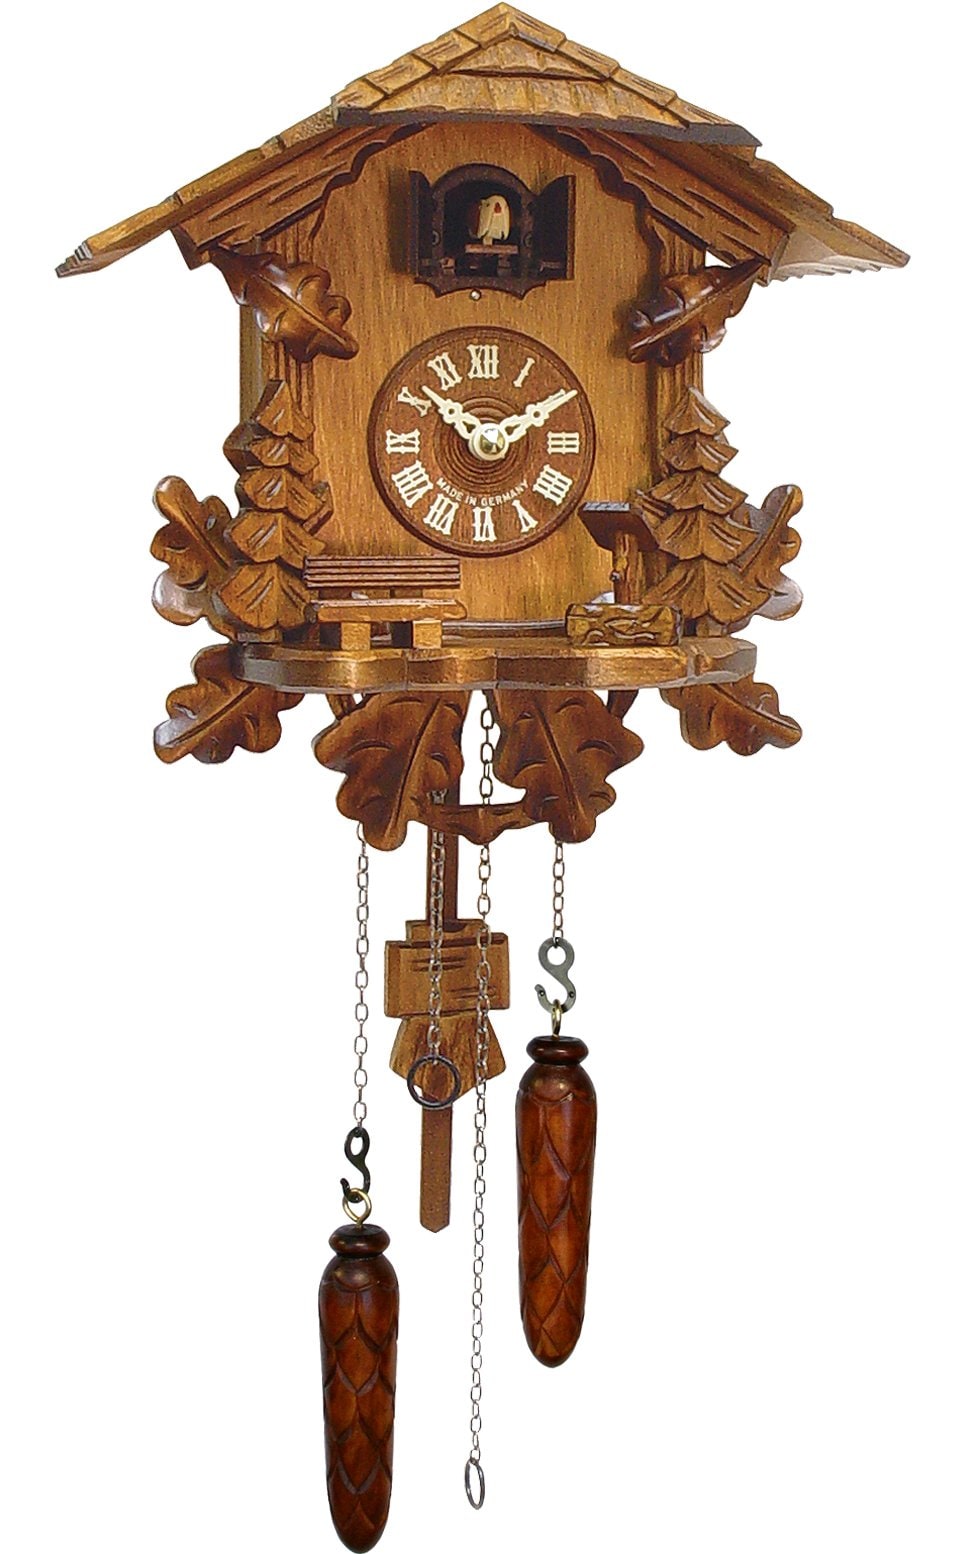 Battery Operated Cuckoo Clock Full Size 10 5 H X 9 75 W X 6 D Cuckoo Forest